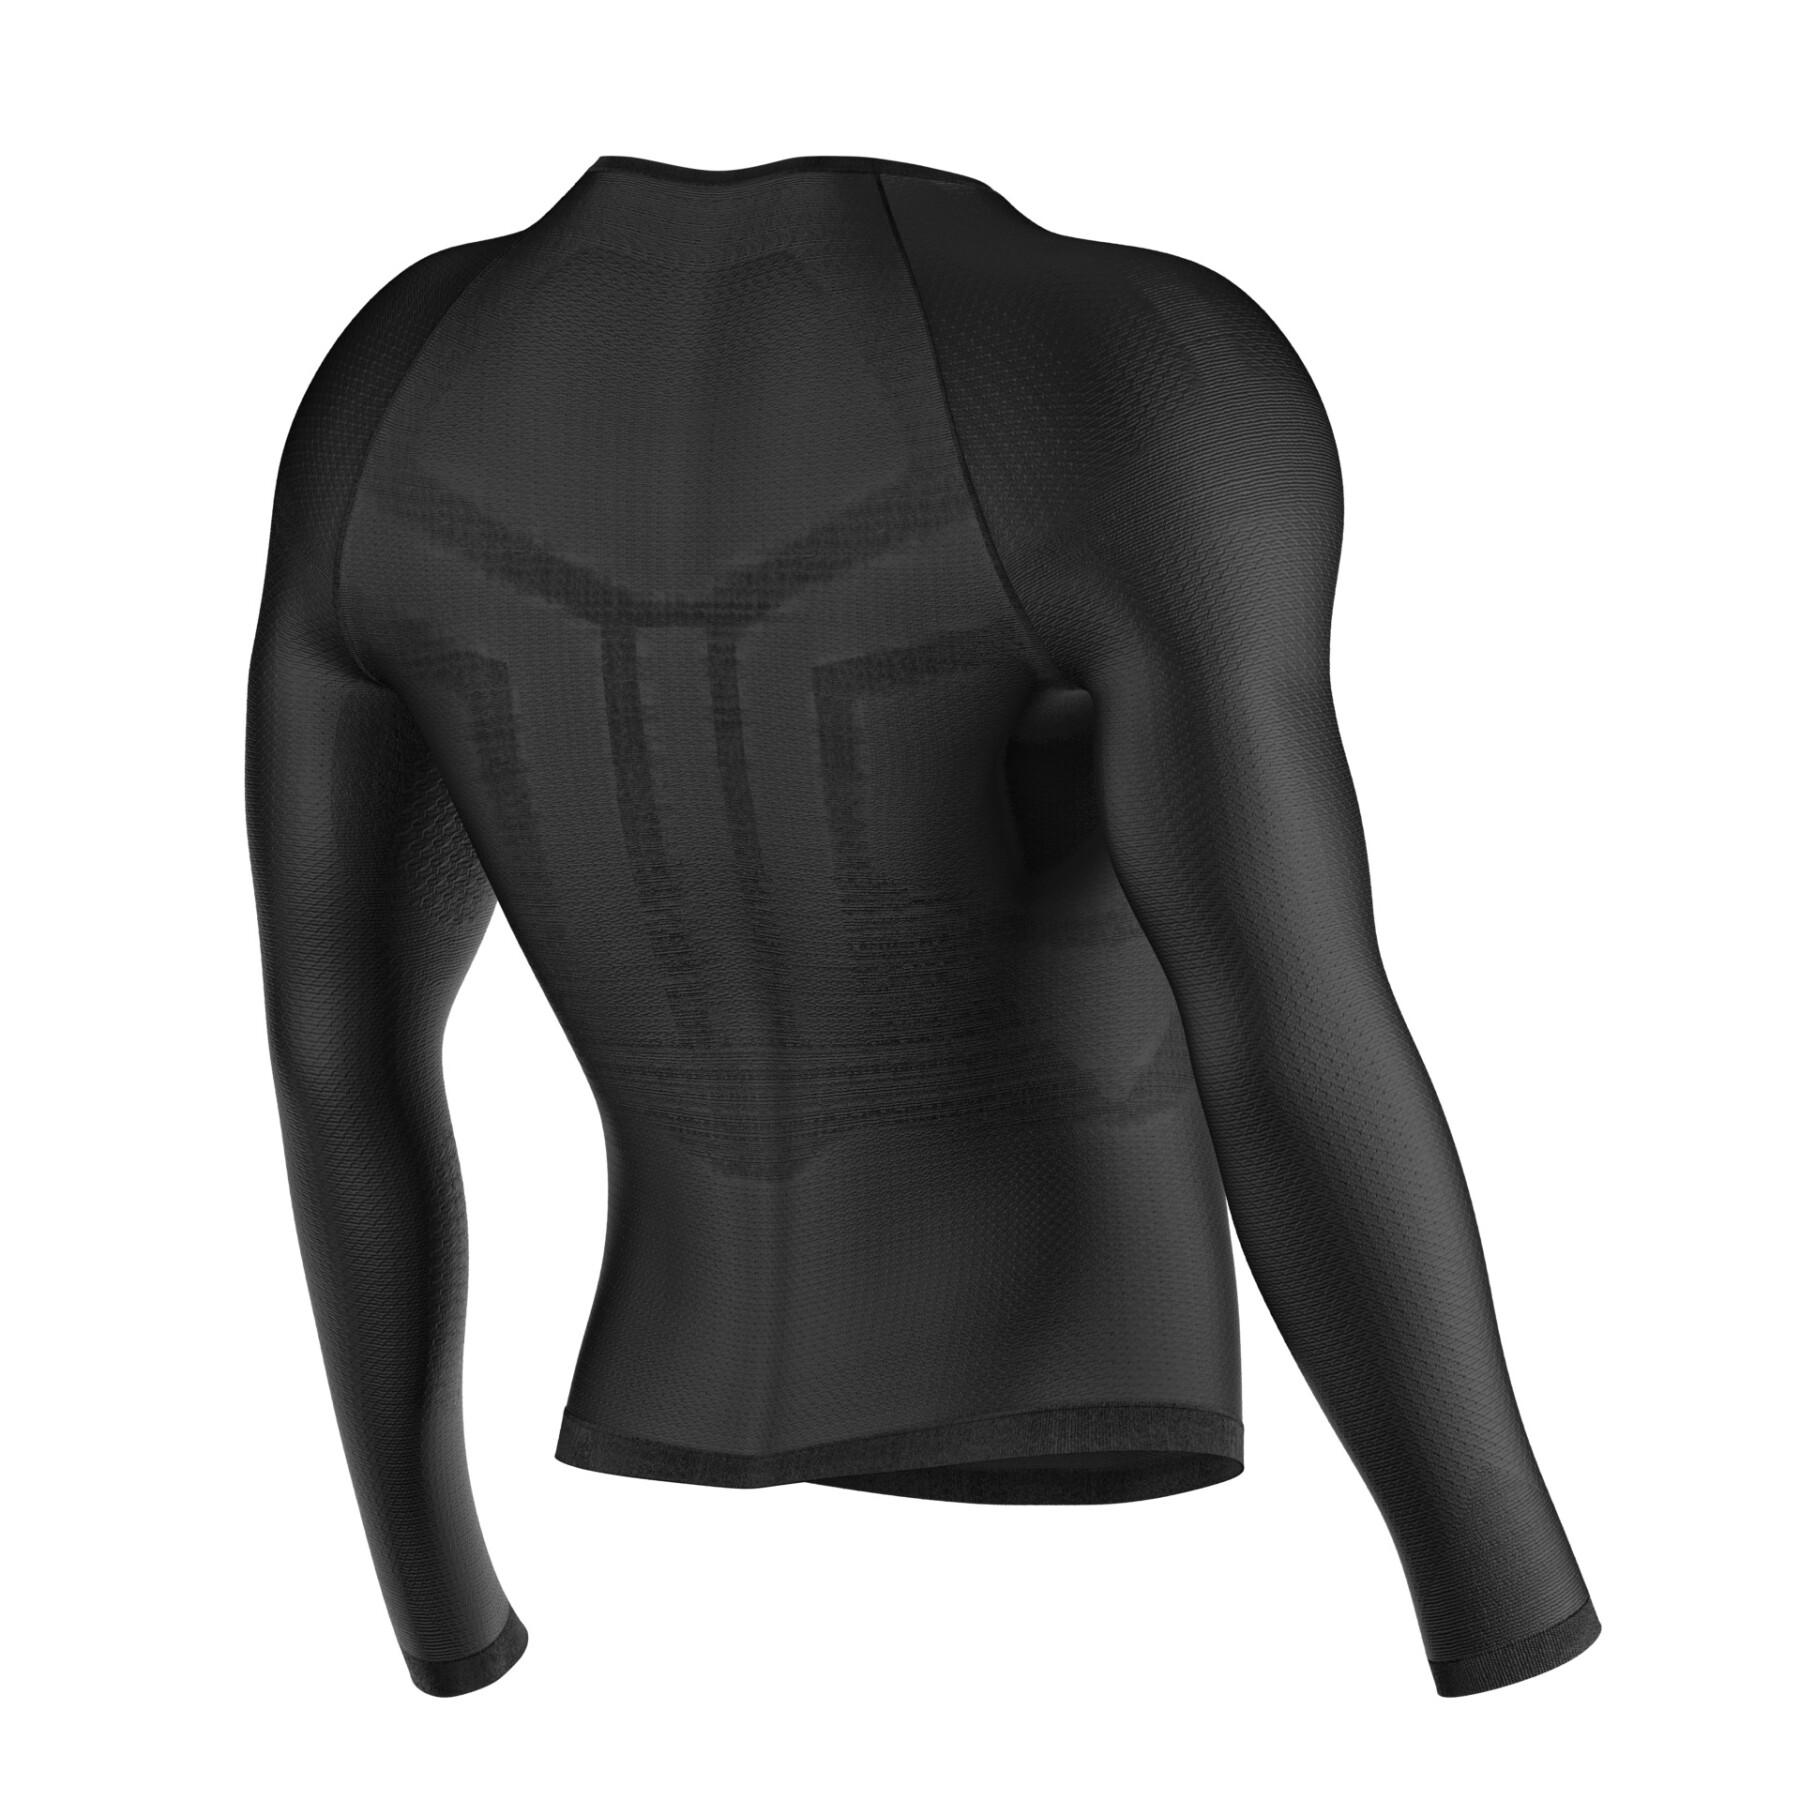 Maillot de compression manches longues Compressport Thermo 3D Ultralight